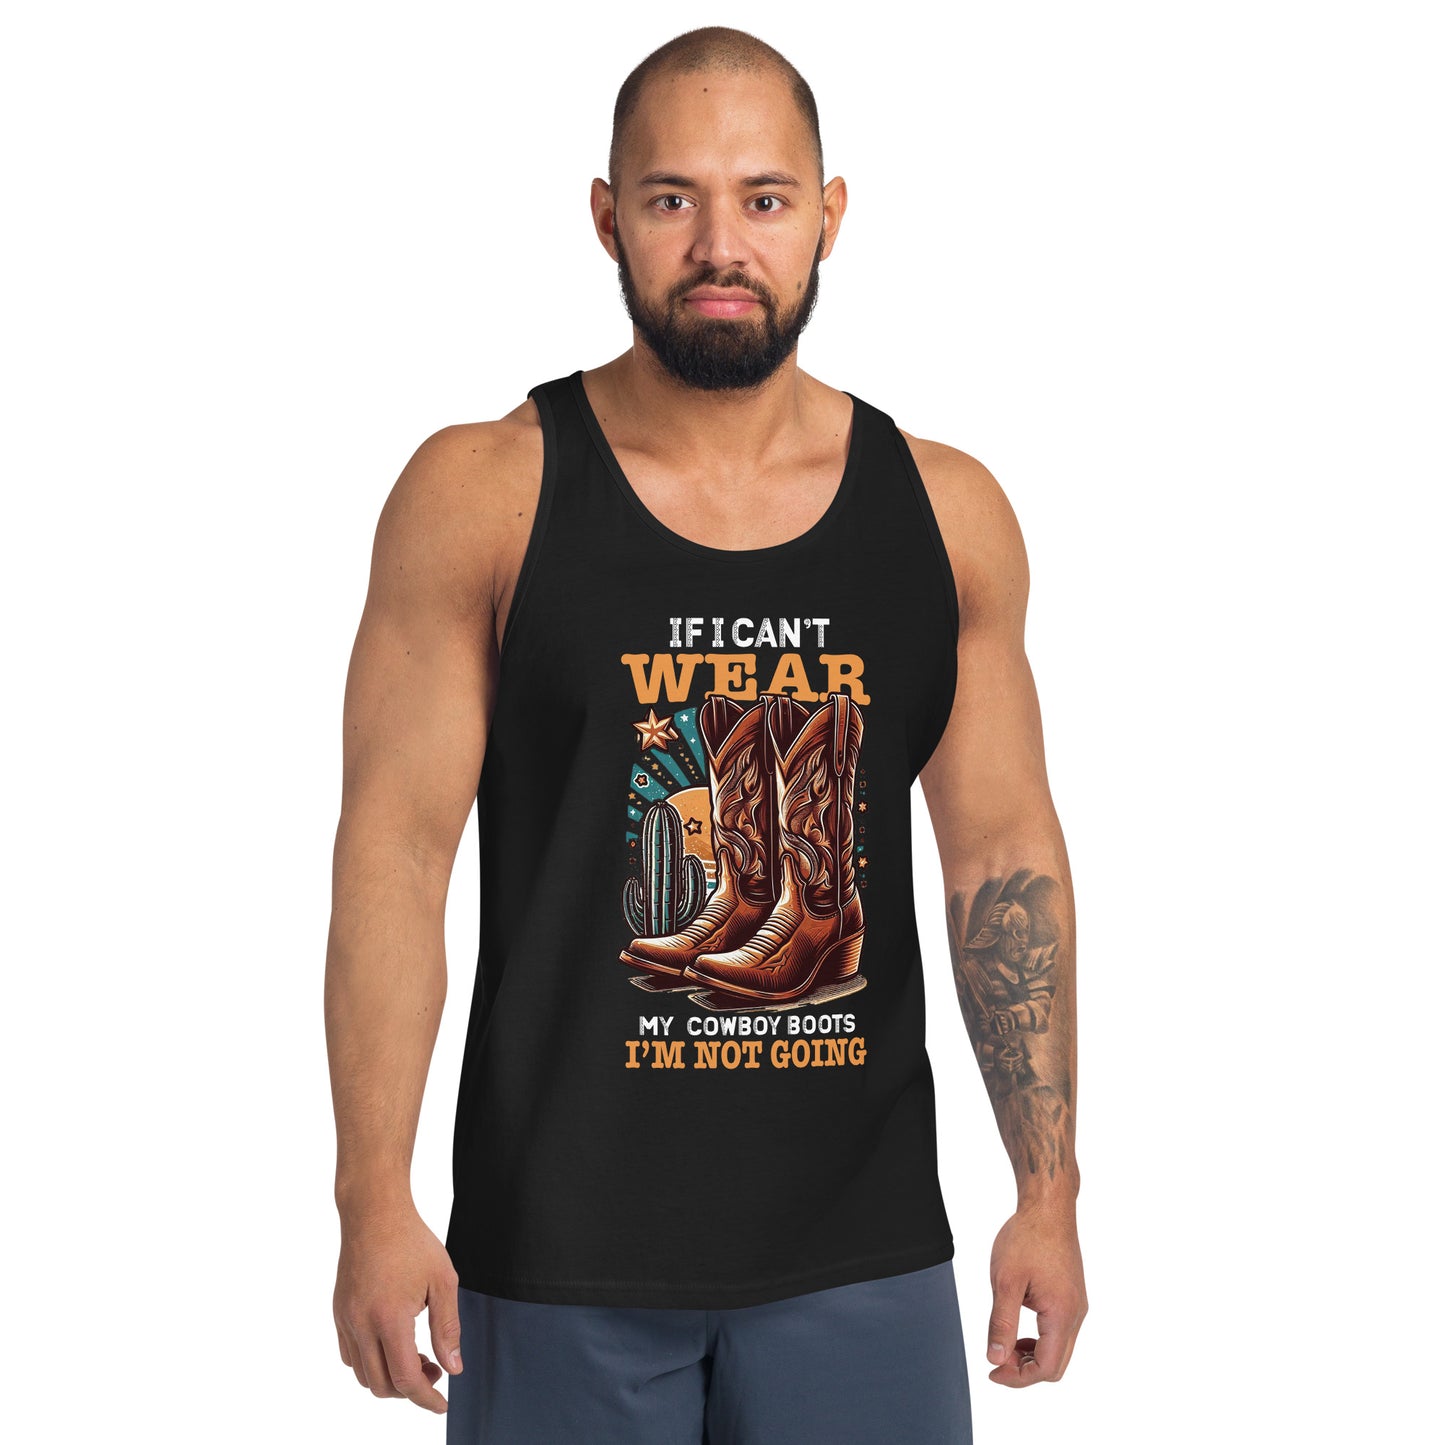 If I cant wear my cowboy boots Men's Tank Top